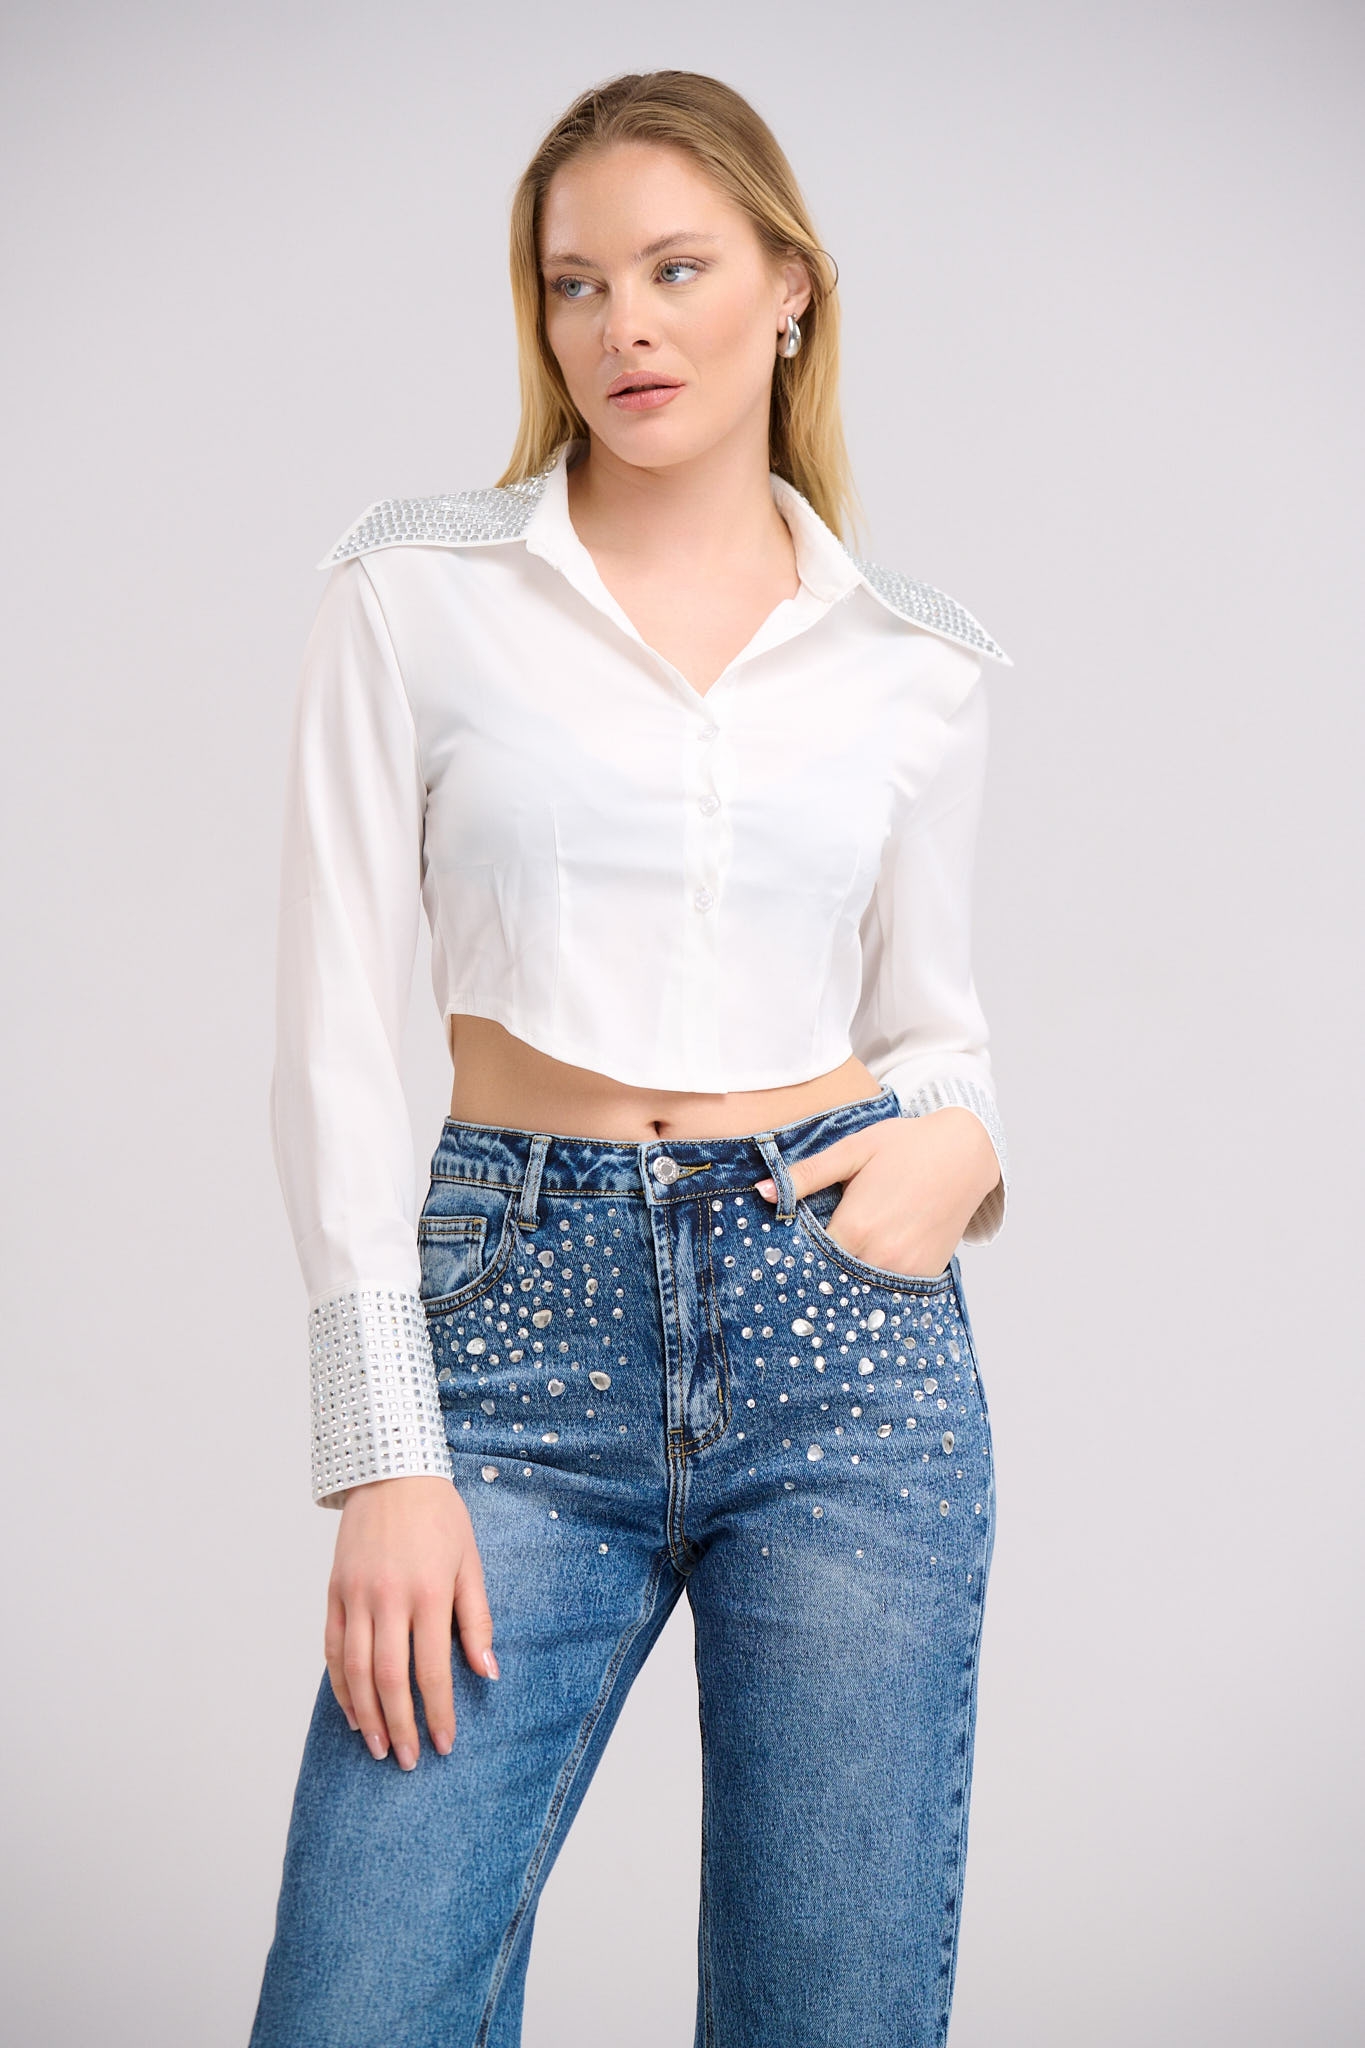 Crop Shirt With Rhinestones On The Collar And Sleeves